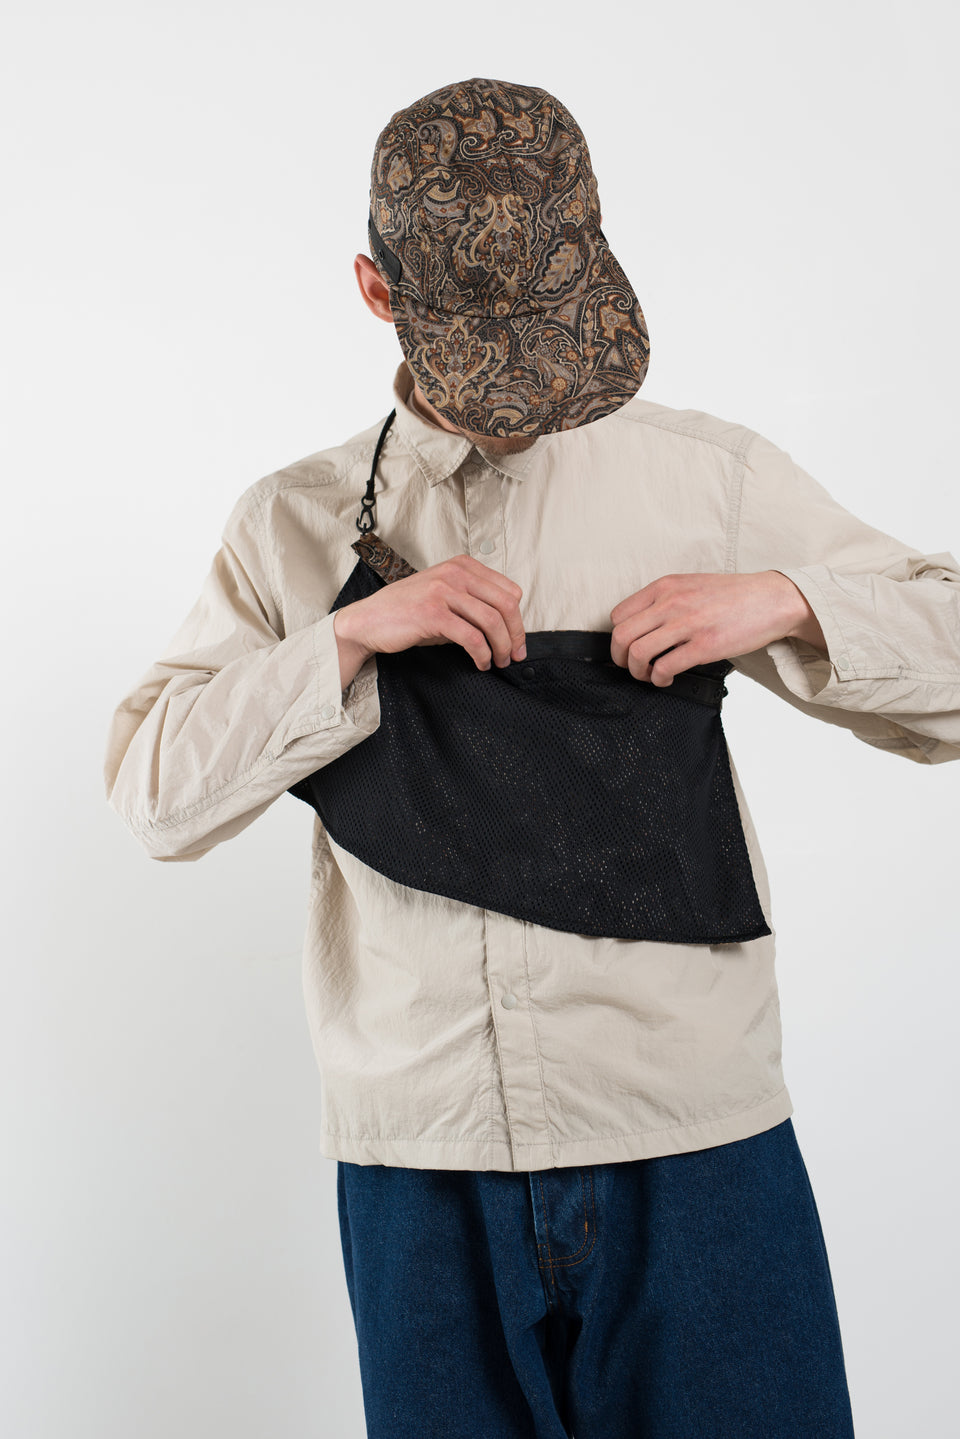 Found Feather SS22 Japan 4 Panel Packable Awning Cap Brown Paisley Calculus Victoria BC Canada